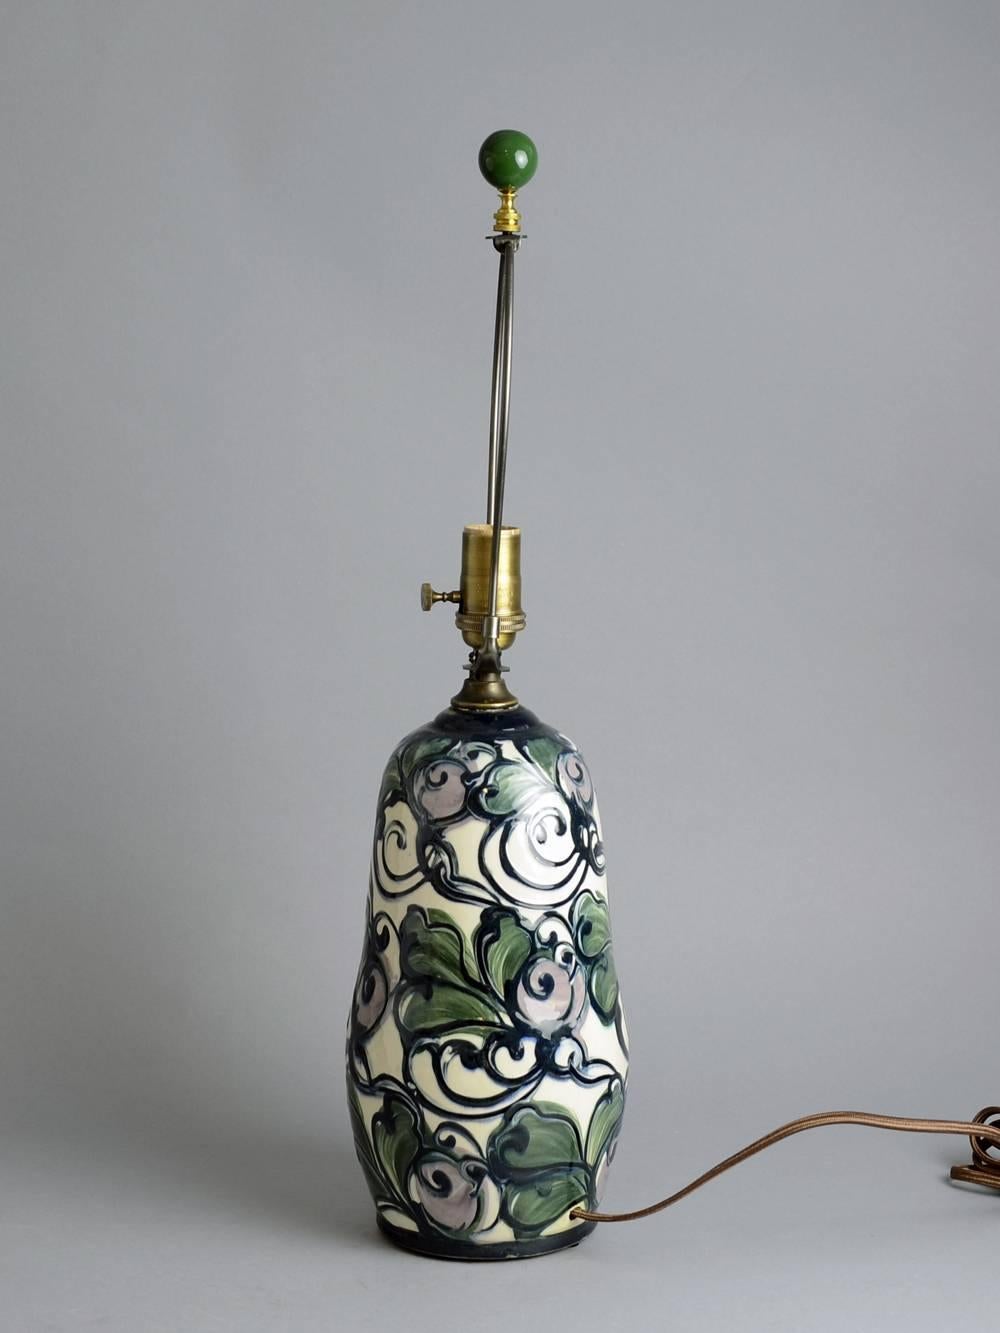 Sofie Lundstein for Herman A. Kahler Keramik

Unique earthenware lamp with glossy glaze in floral pattern, circa 1910s-1920s.
Measure: Height to socket 16